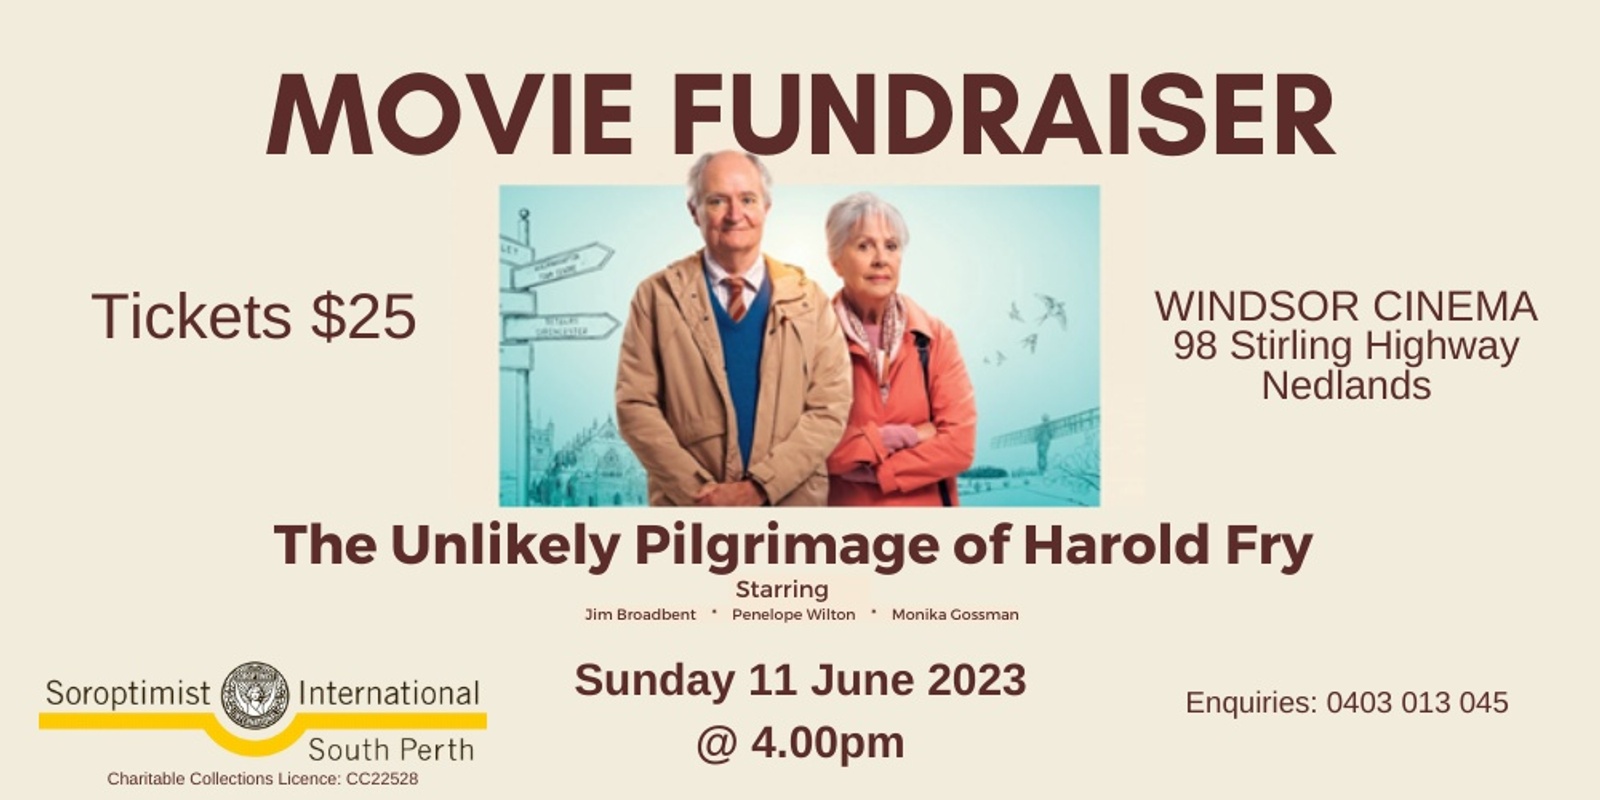 Banner image for Movie Fundraiser - The Unlikely Pilgrimage of Harold Fry